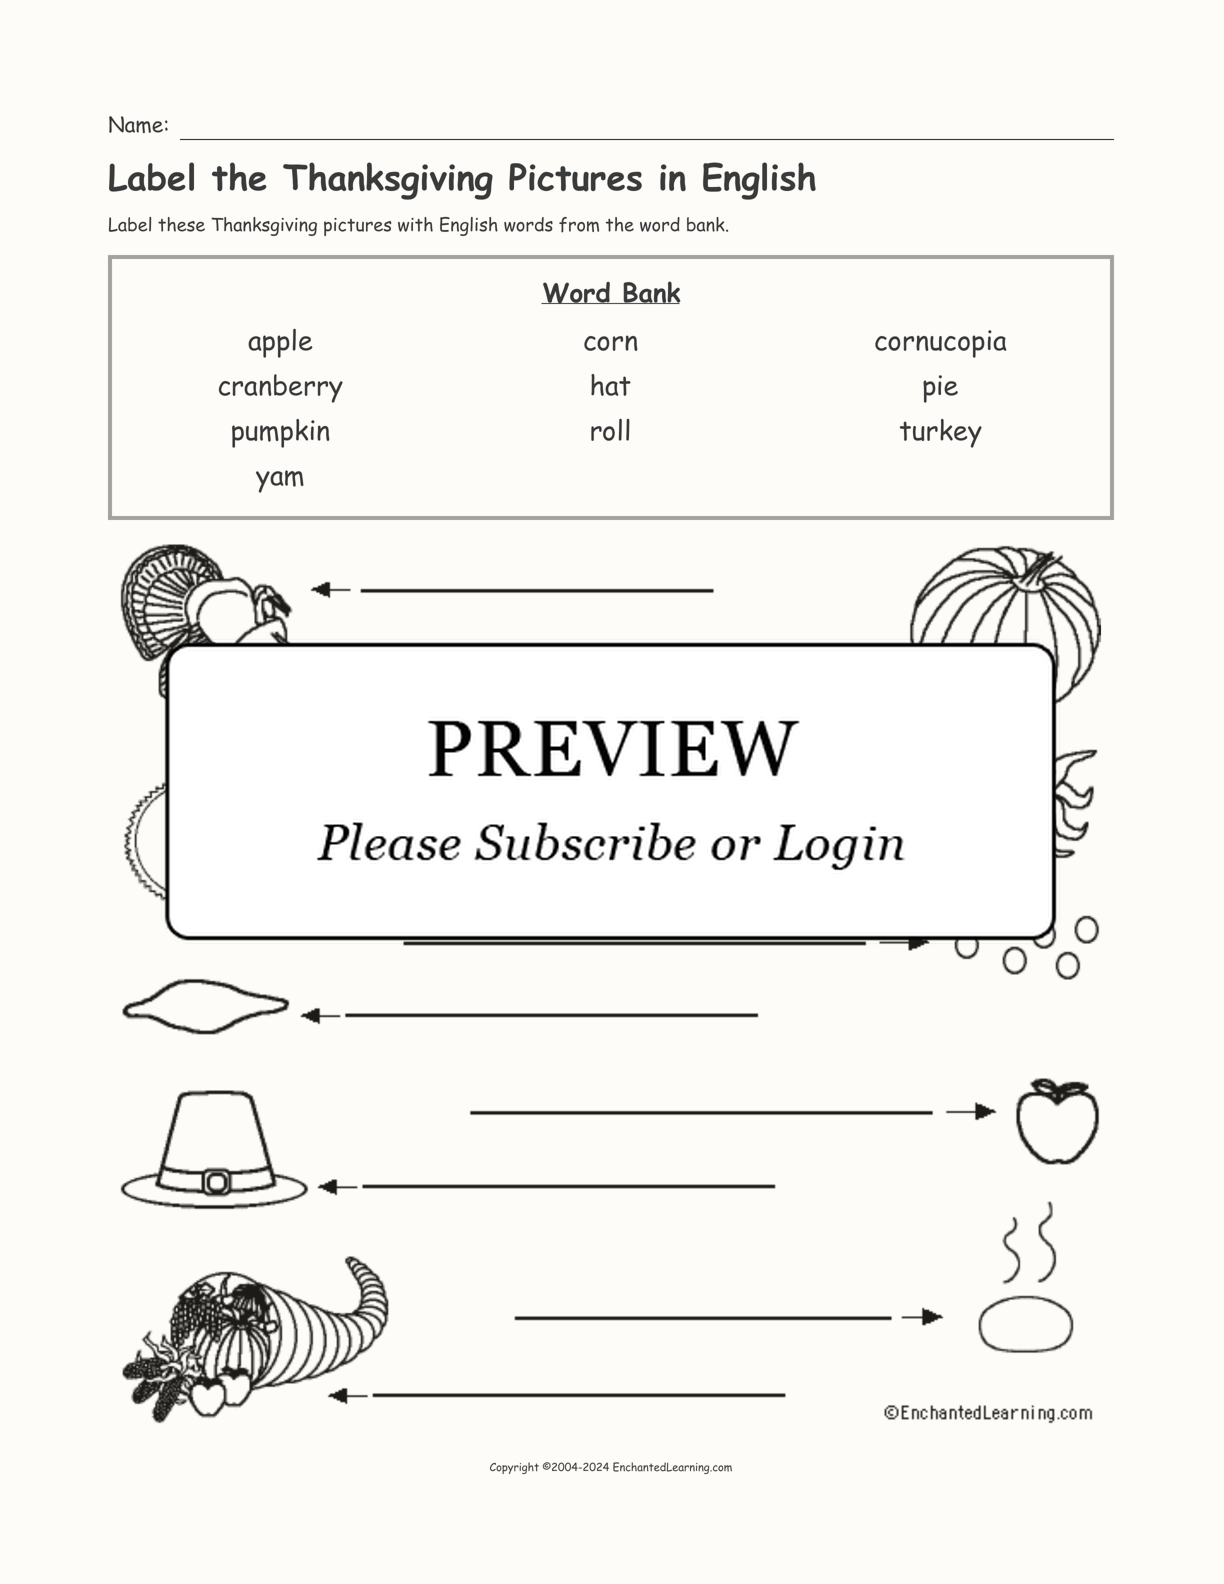 Label the Thanksgiving Pictures in English interactive worksheet page 1